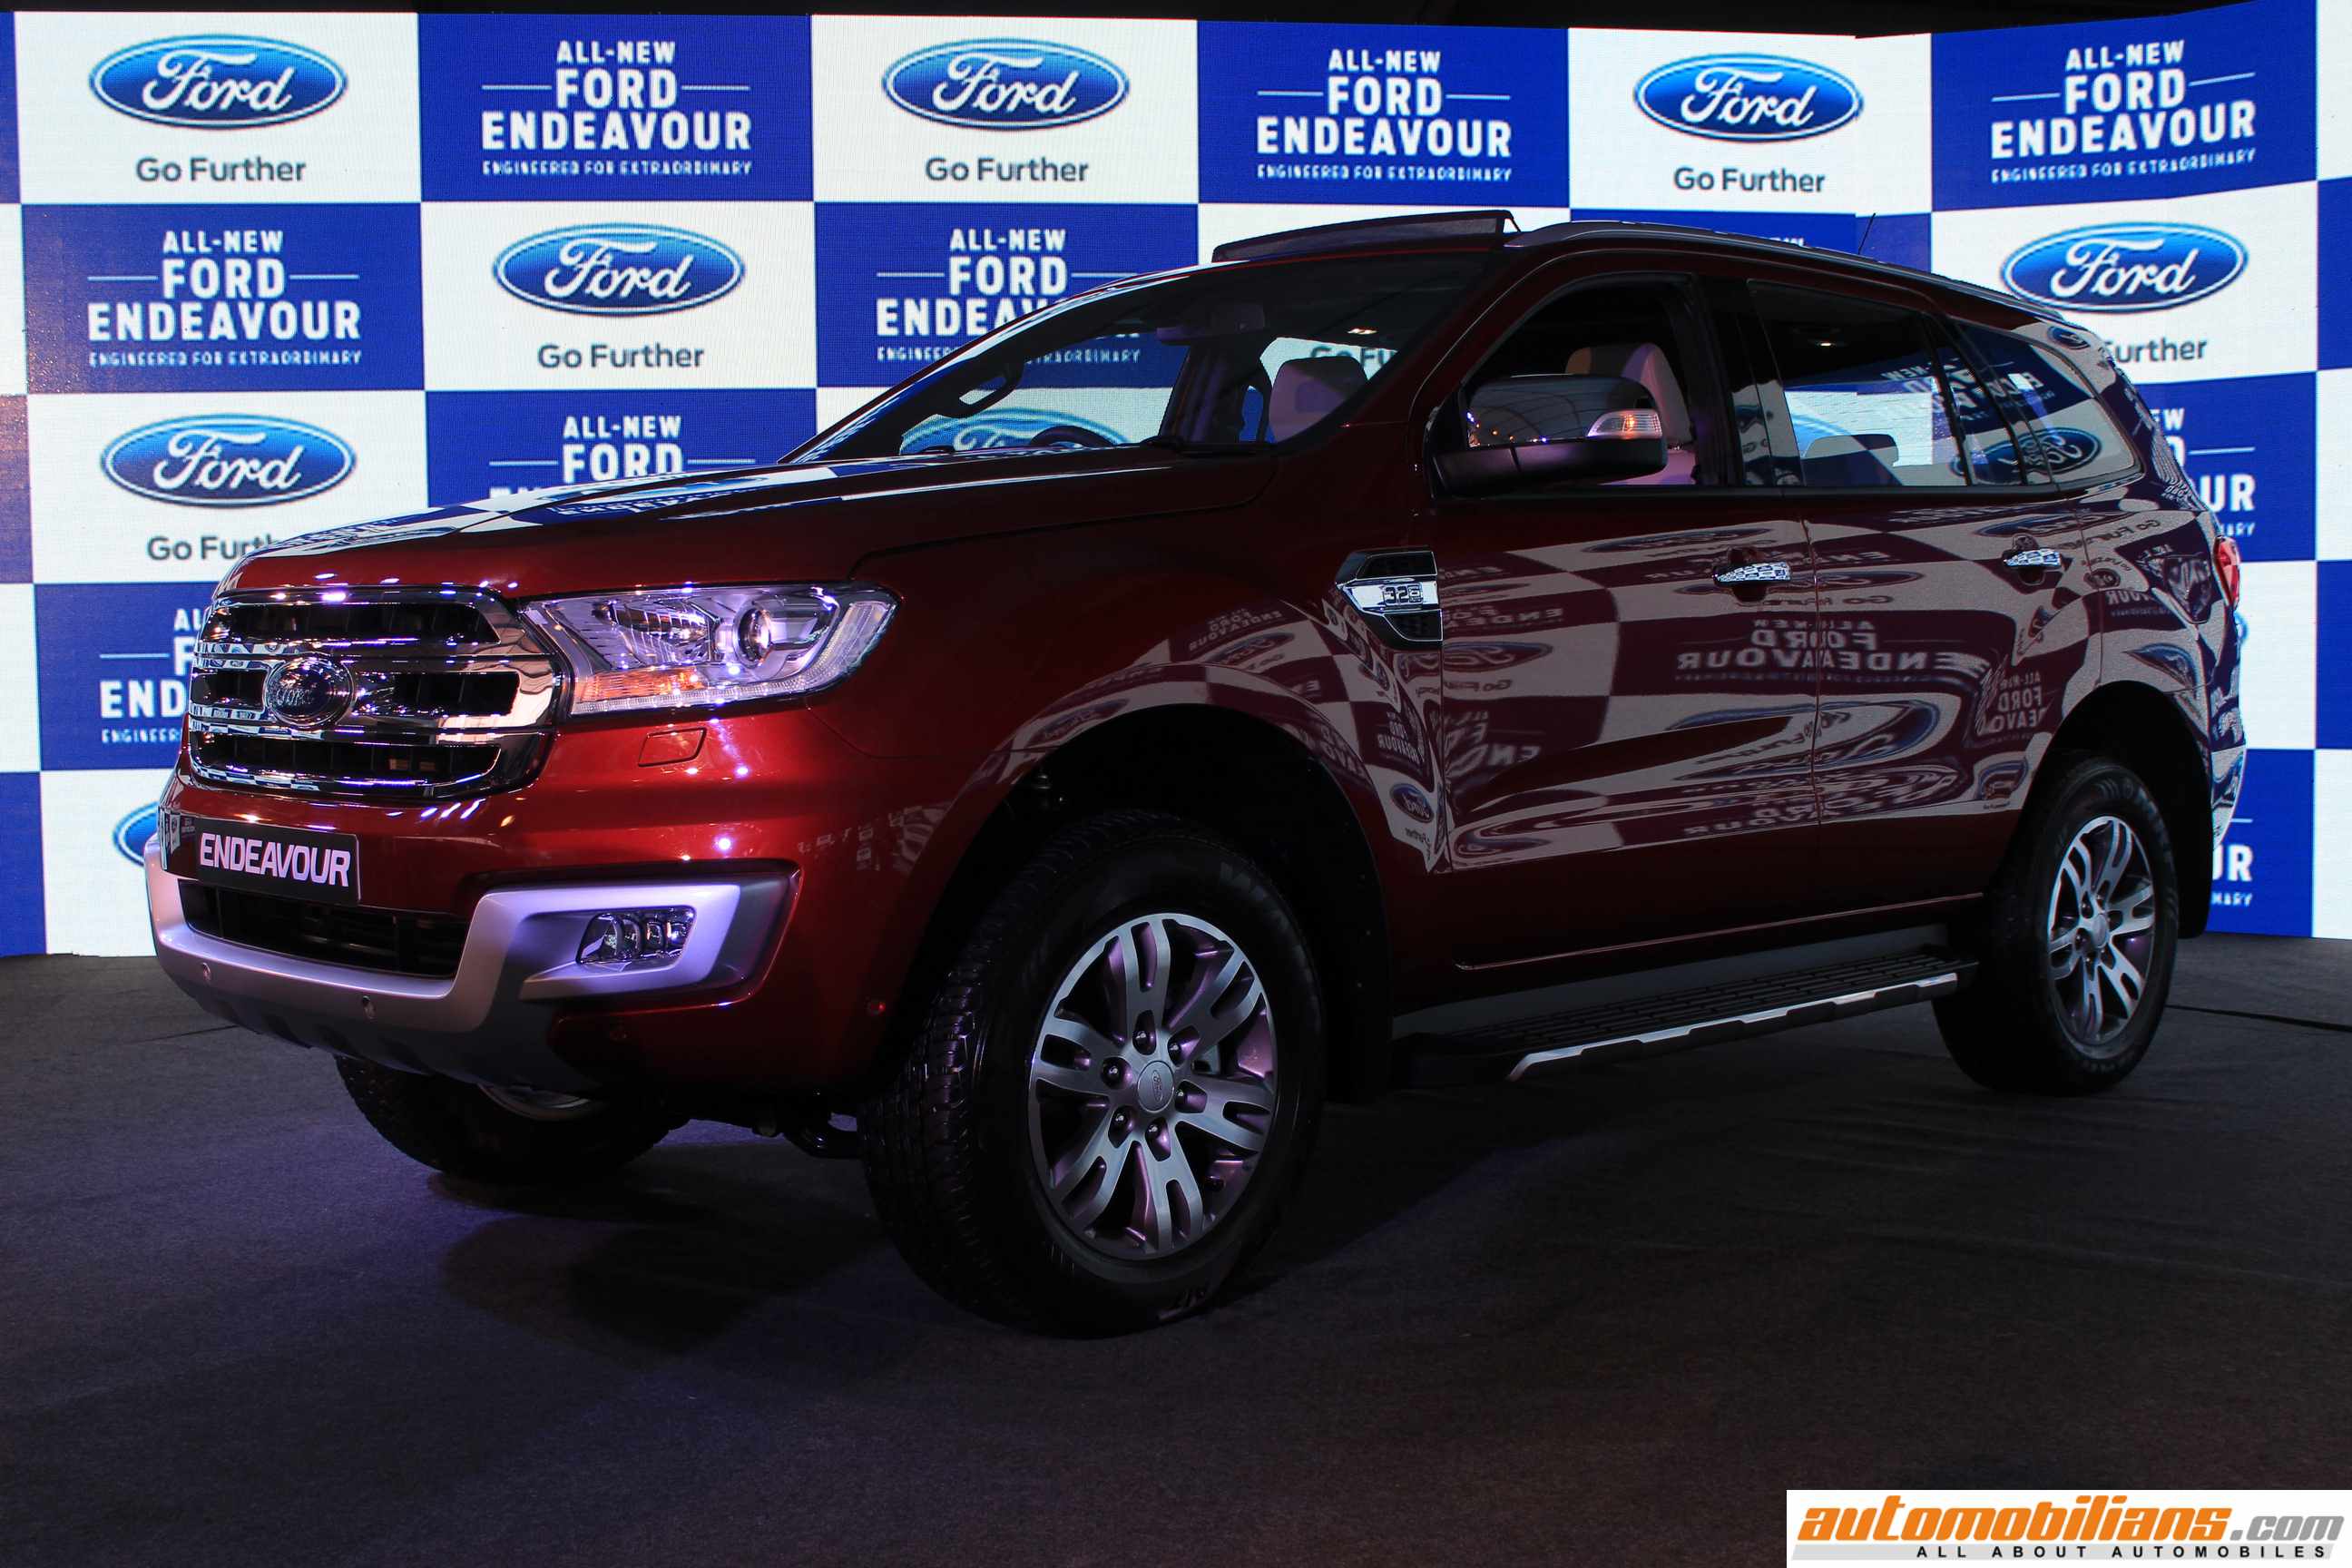 2016 Ford Endeavour Launched In India At Rs. 24.75 Lakhs (Ex-Showroom, Mumbai)